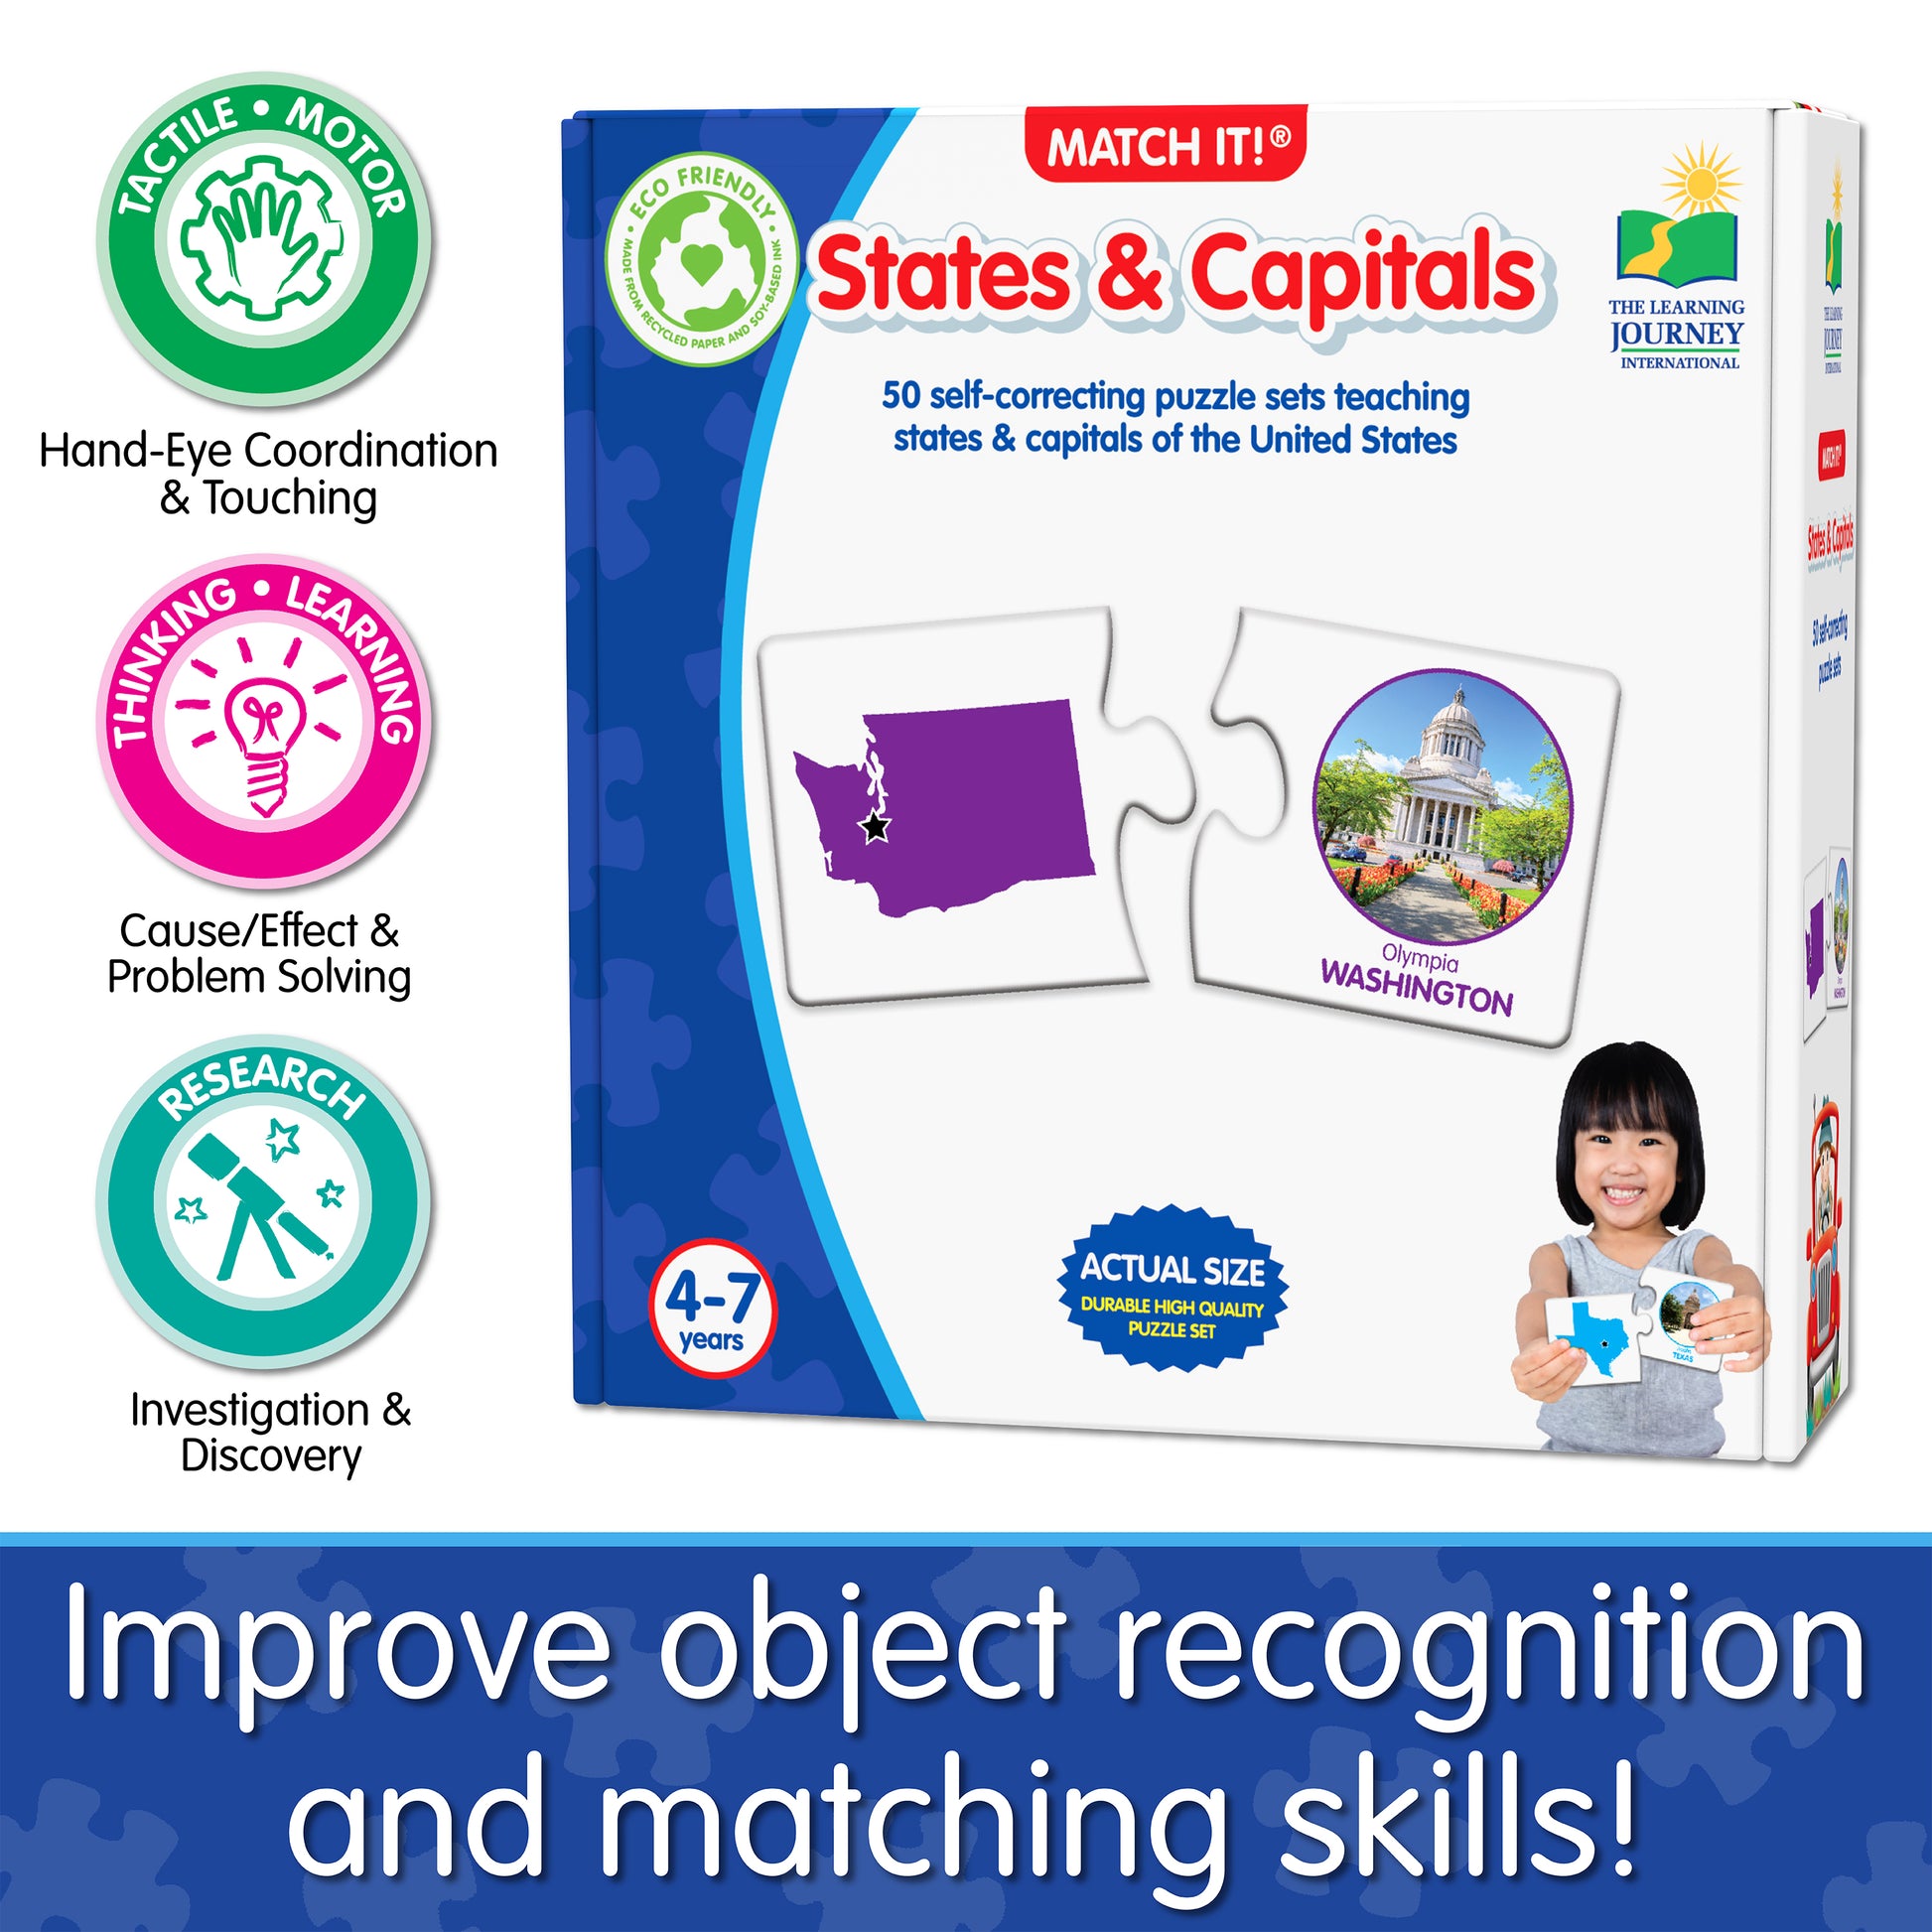 Infographic about Match It - States and Capitals' educational benefits that says, "Improve object recognition and matching skills!"